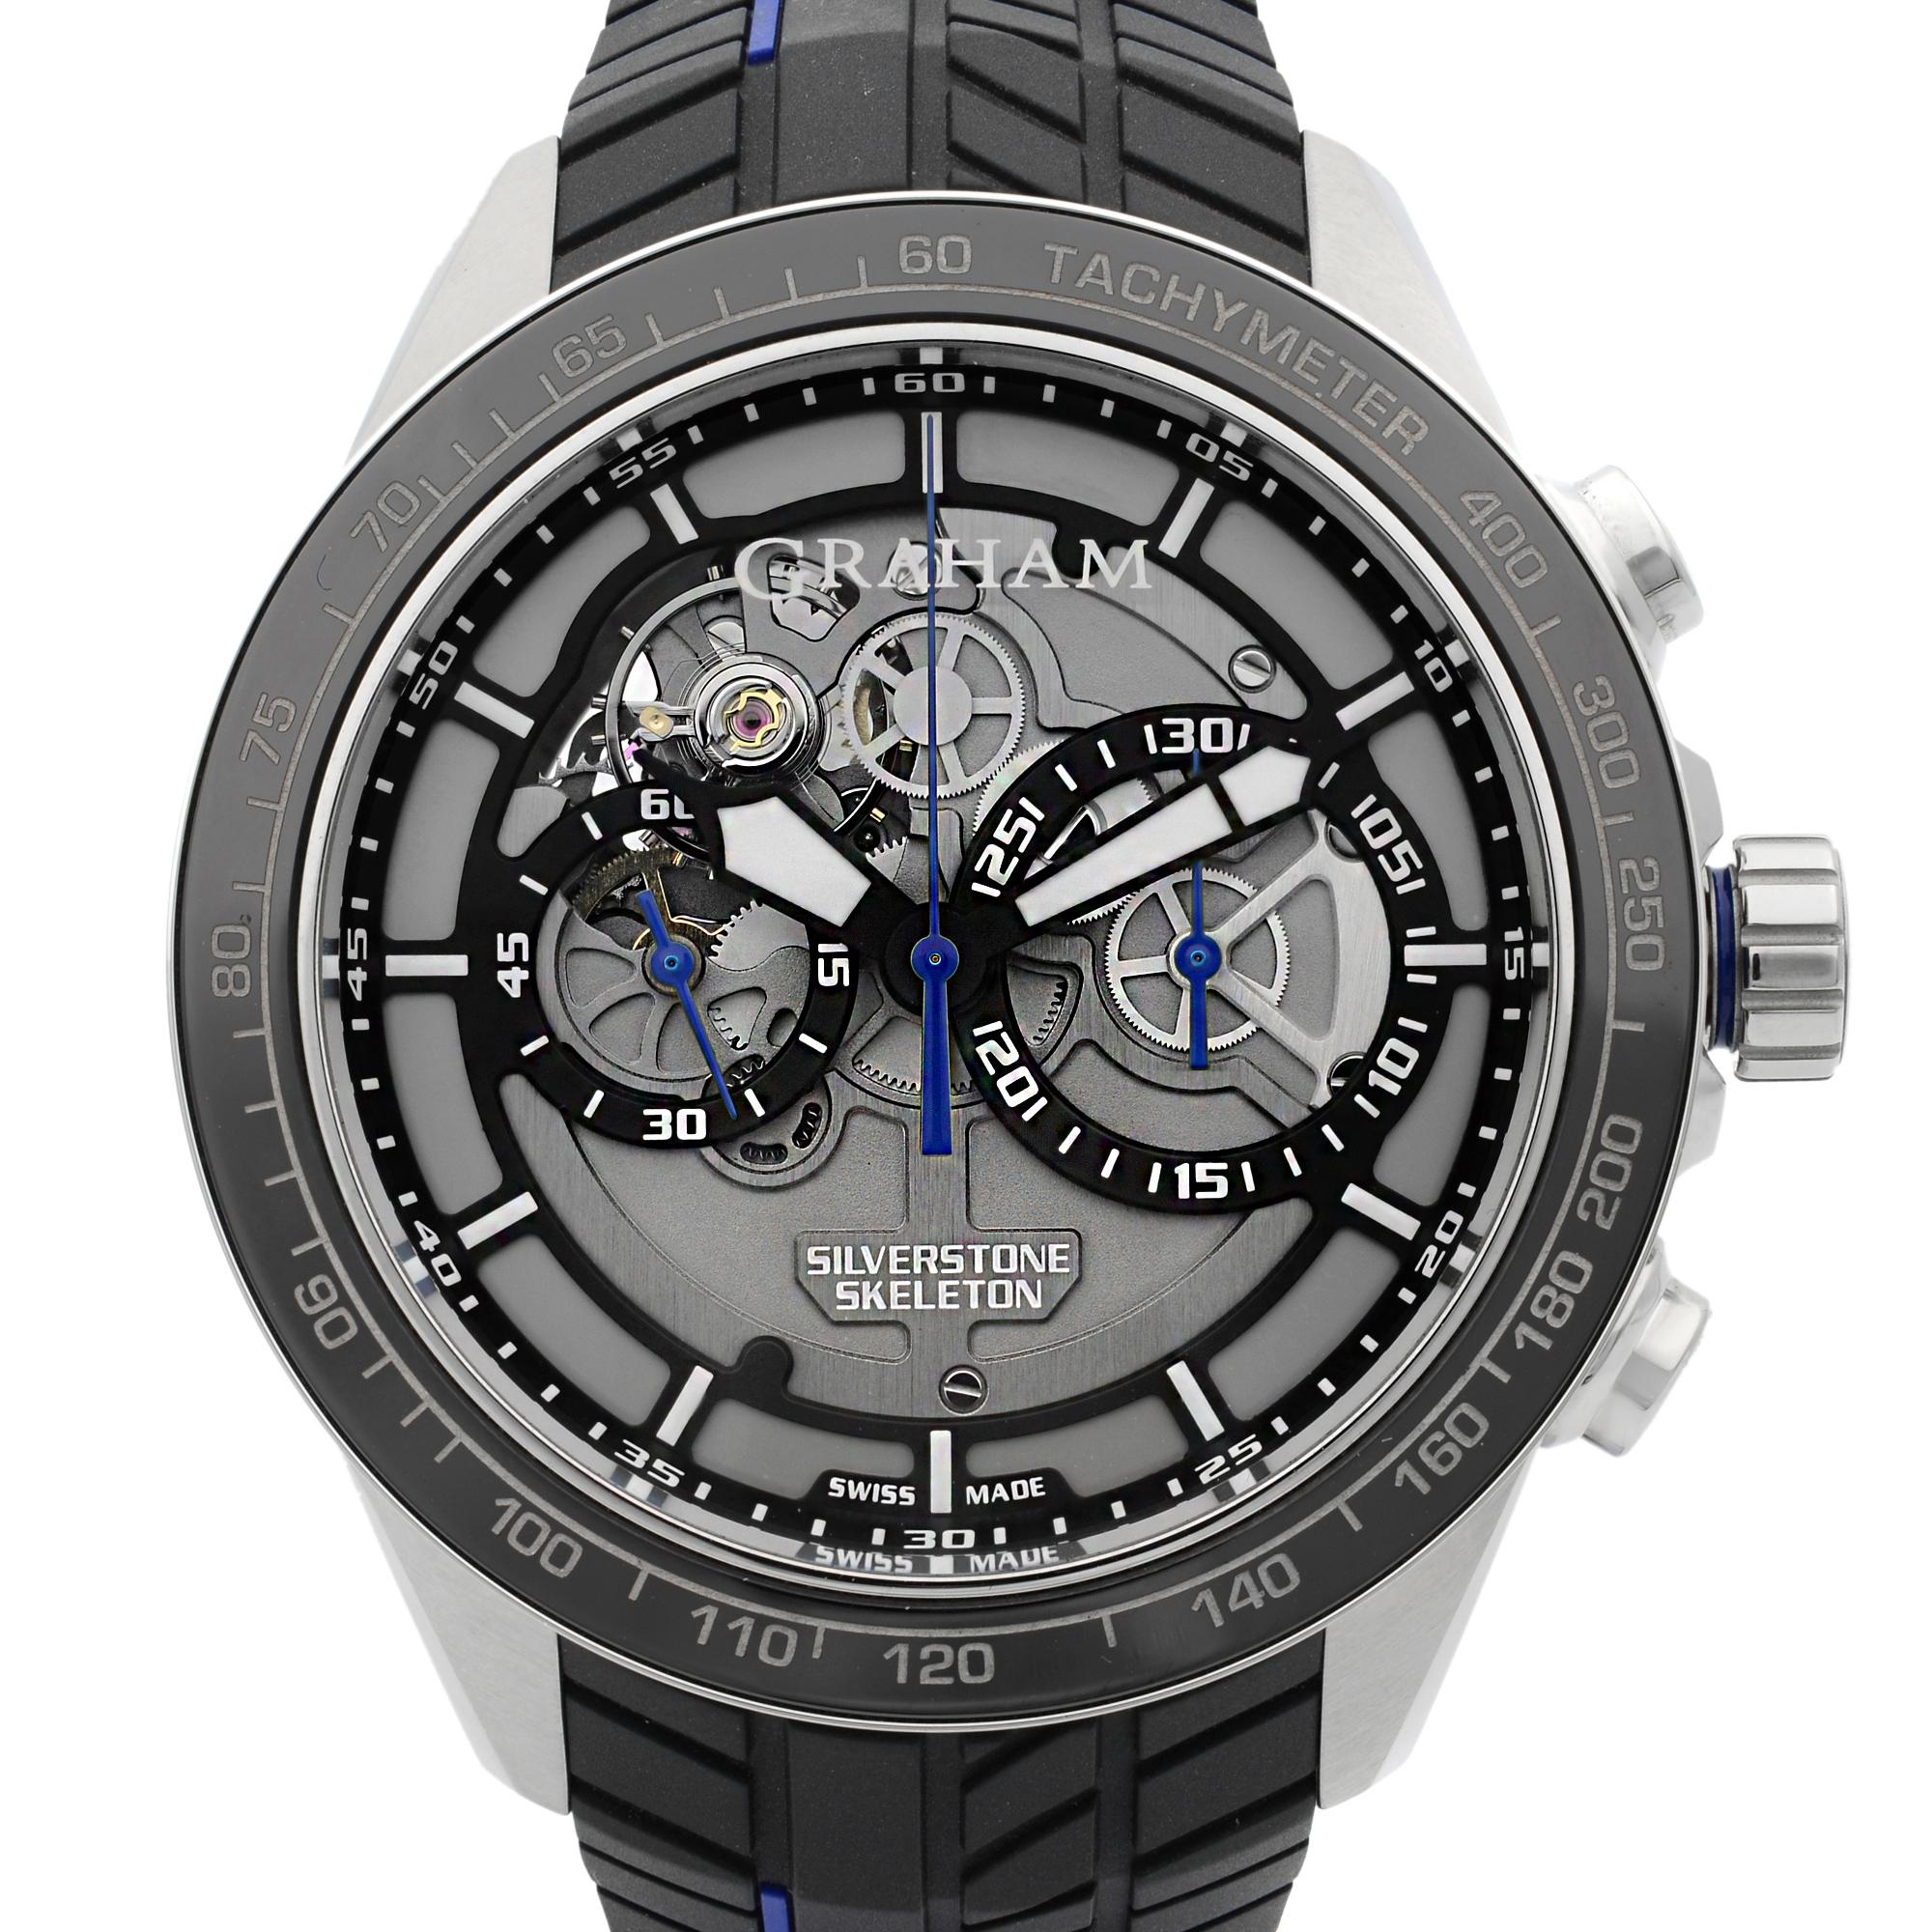 This display model Graham Silverstone RS Skeleton 2STAC3.B01A.K91F is a beautiful men's timepiece that is powered by mechanical (automatic) movement which is cased in a stainless steel case. It has a round shape face, chronograph, chronograph hand,